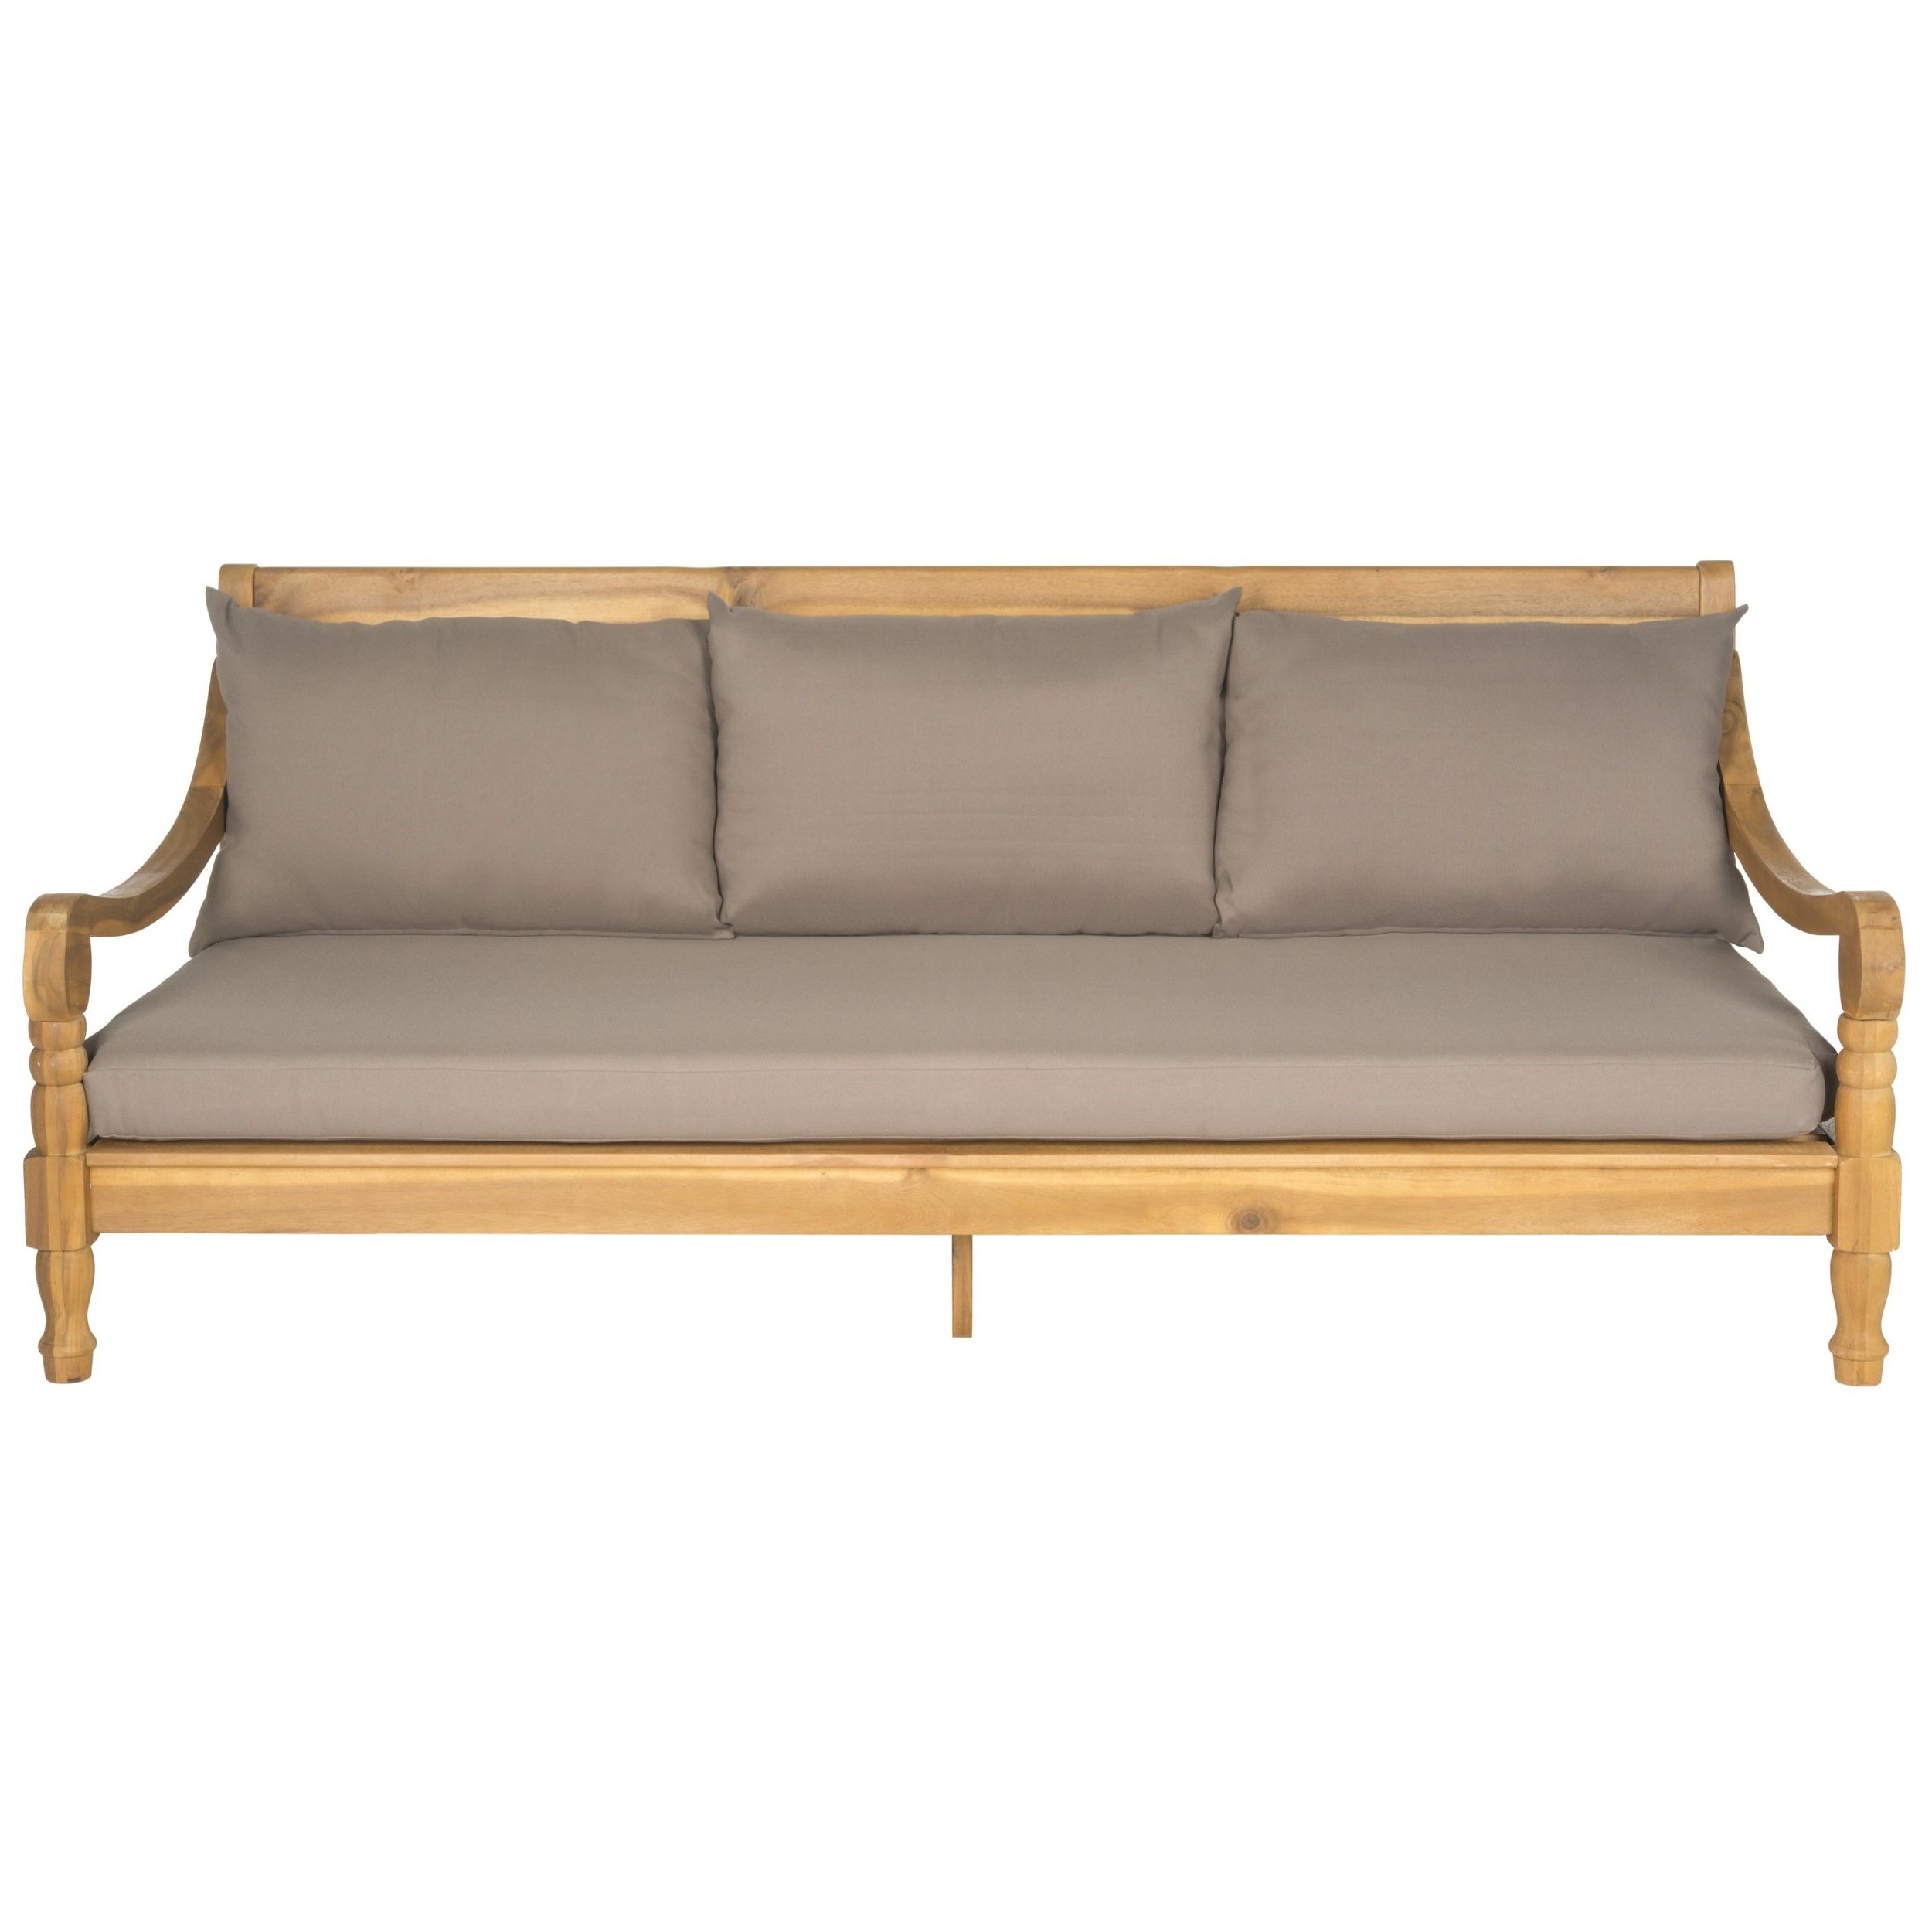 Trendy Ellanti Teak Patio Daybeds With Cushions Intended For Roush Teak Patio Daybed With Cushions (View 12 of 20)